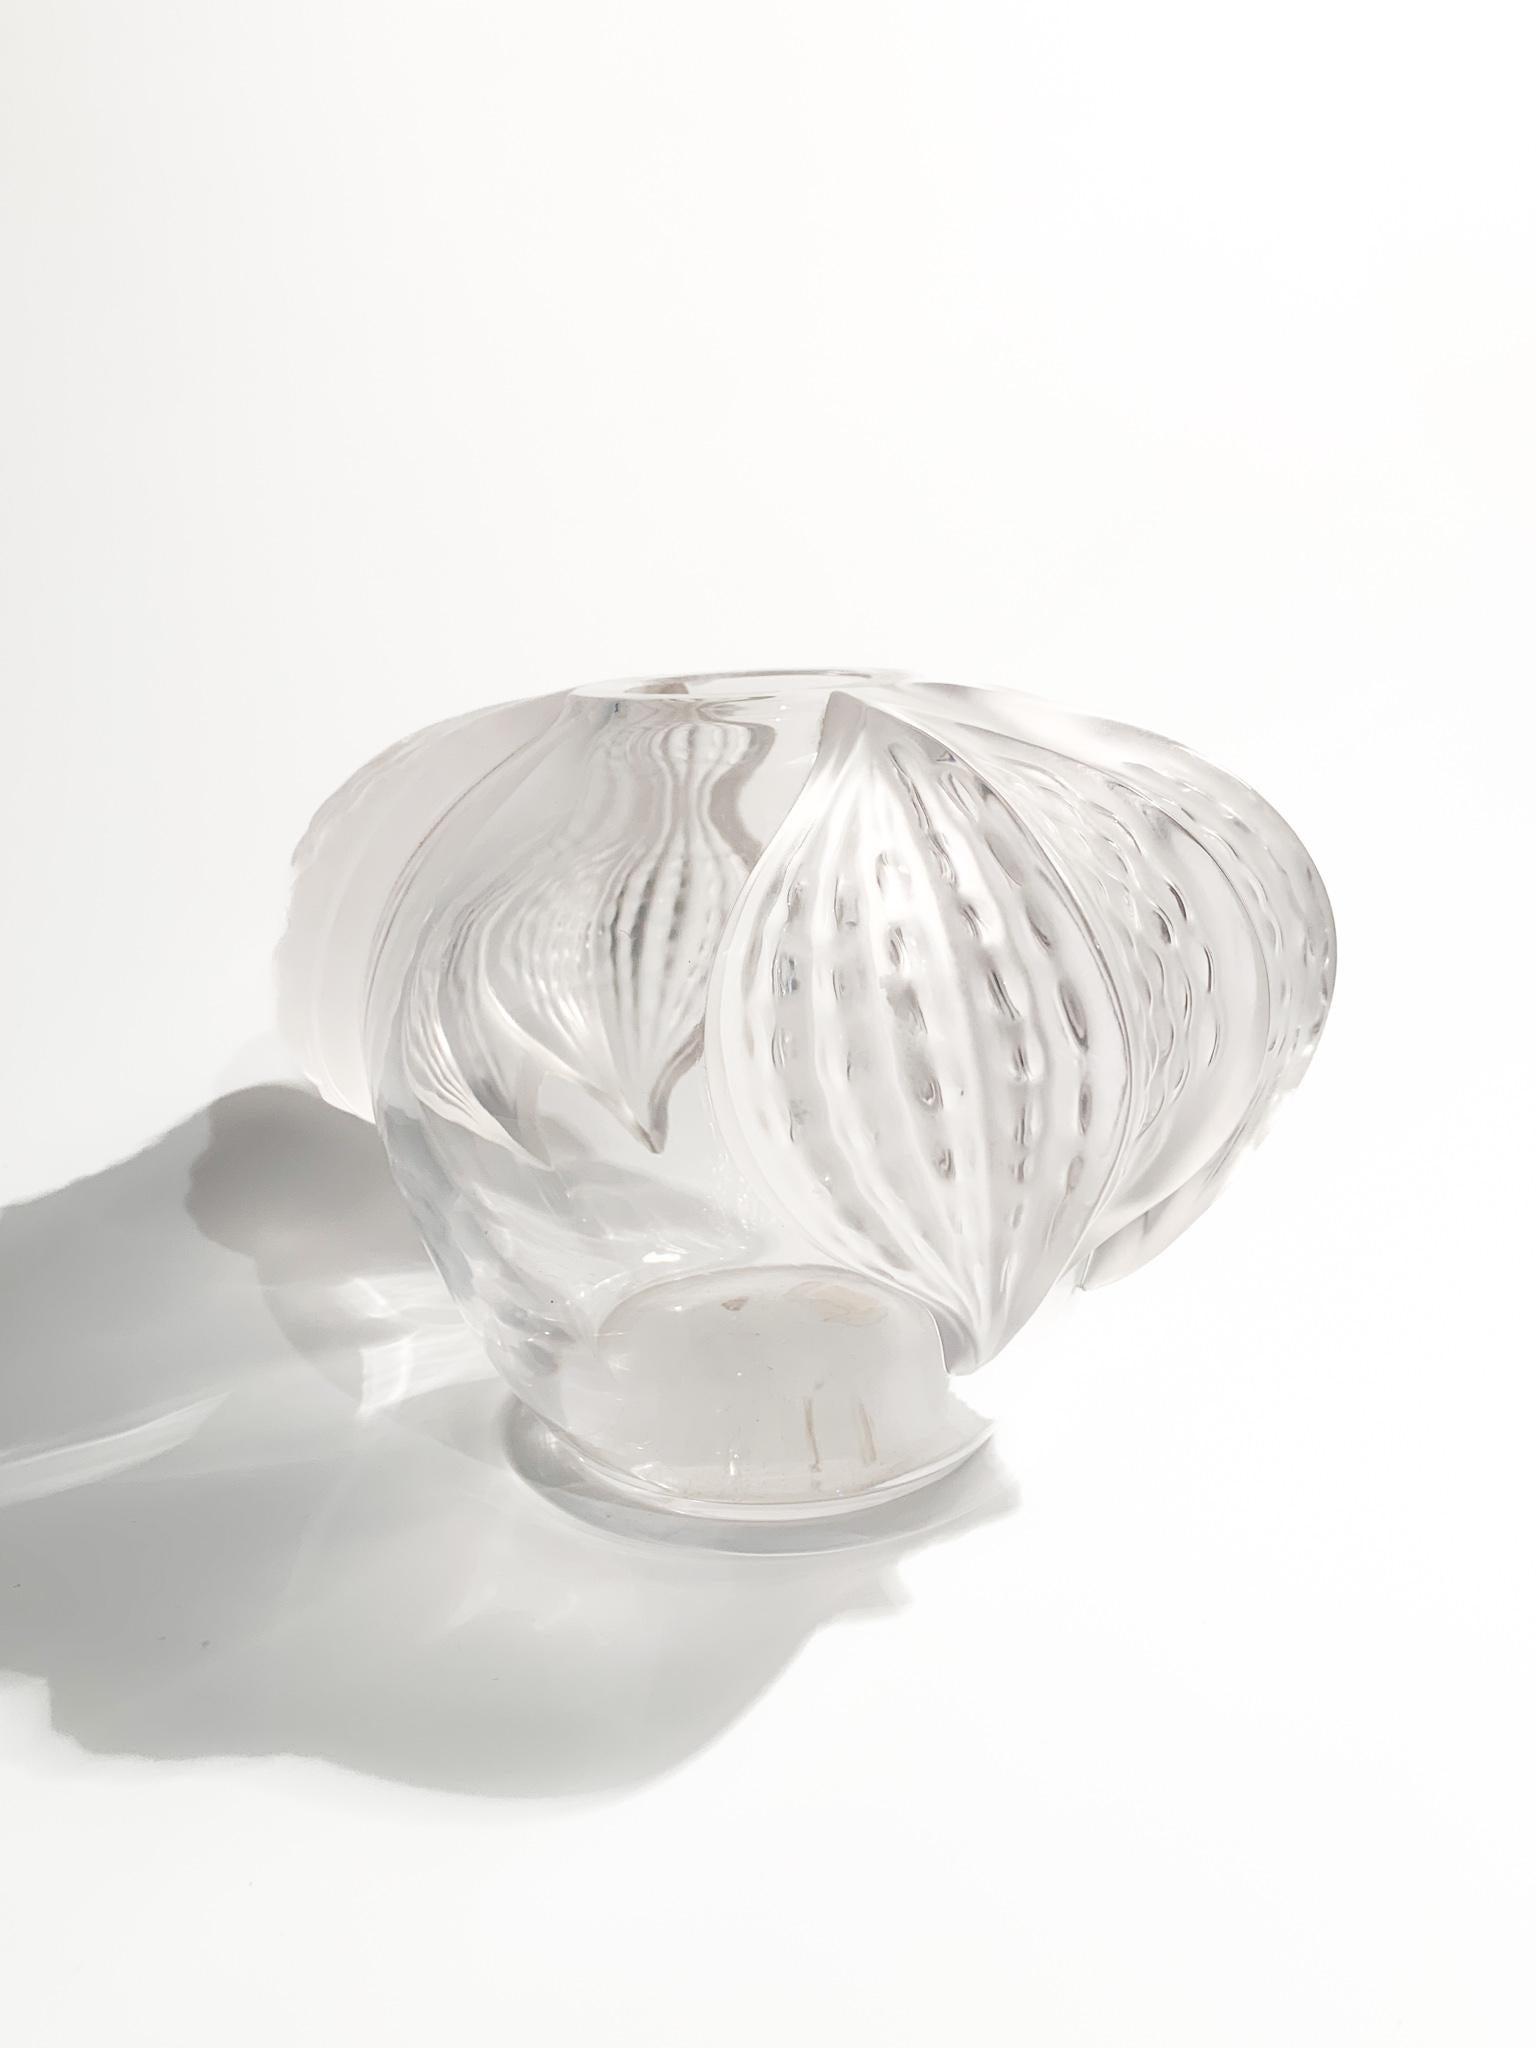 French Lalique Crystal Vase, San Diego Model, 1940s For Sale 4